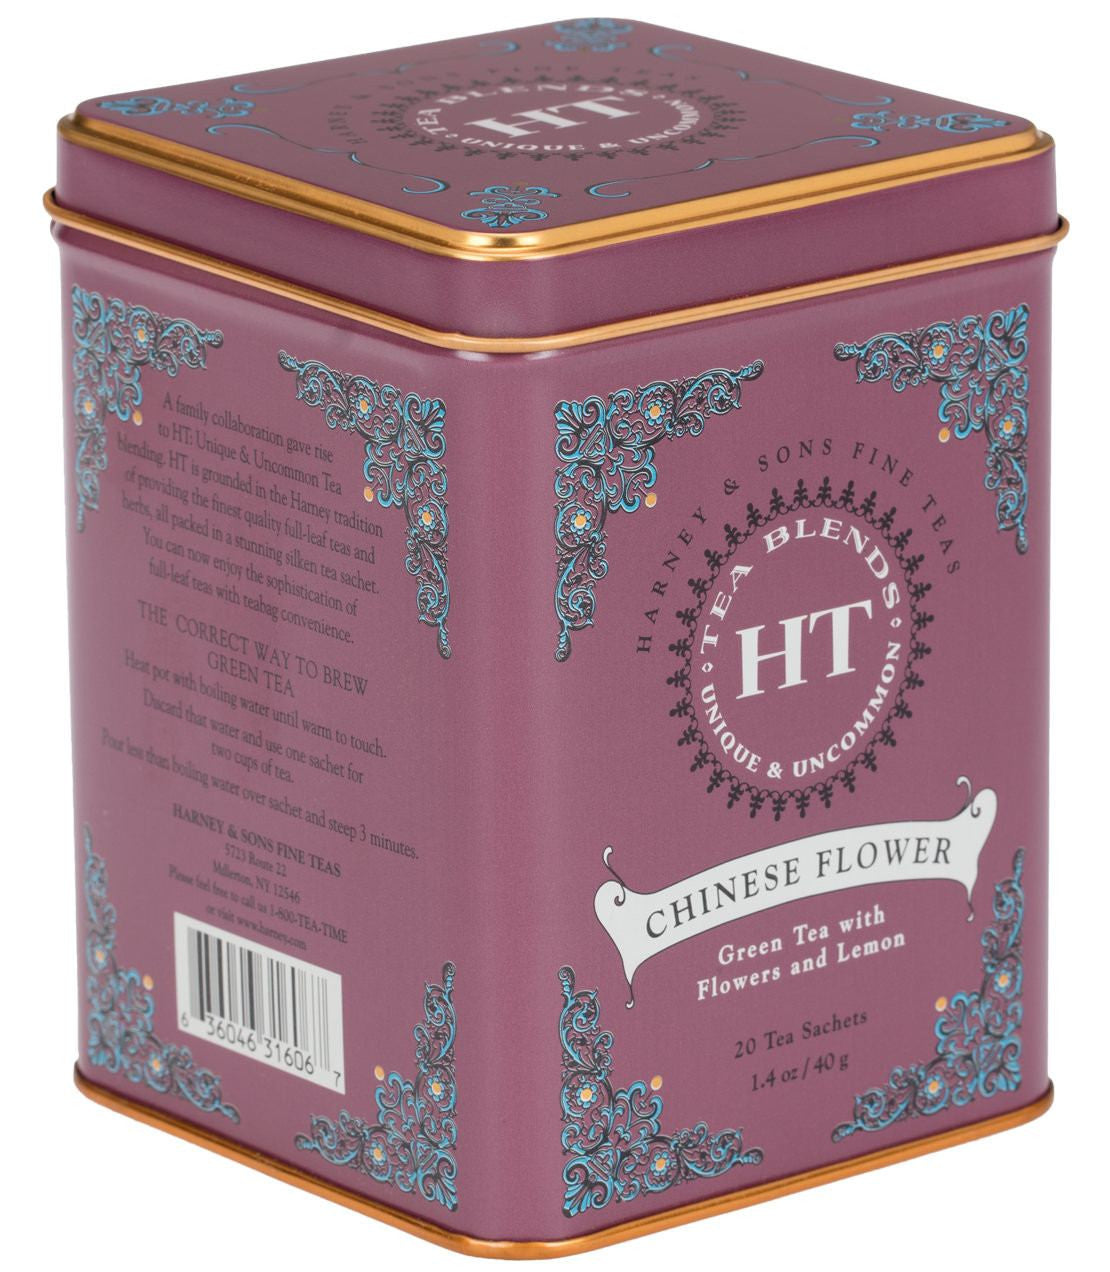 Download Chinese Flower Tea Sachets | Tin of 20 - Harney & Sons Fine Teas